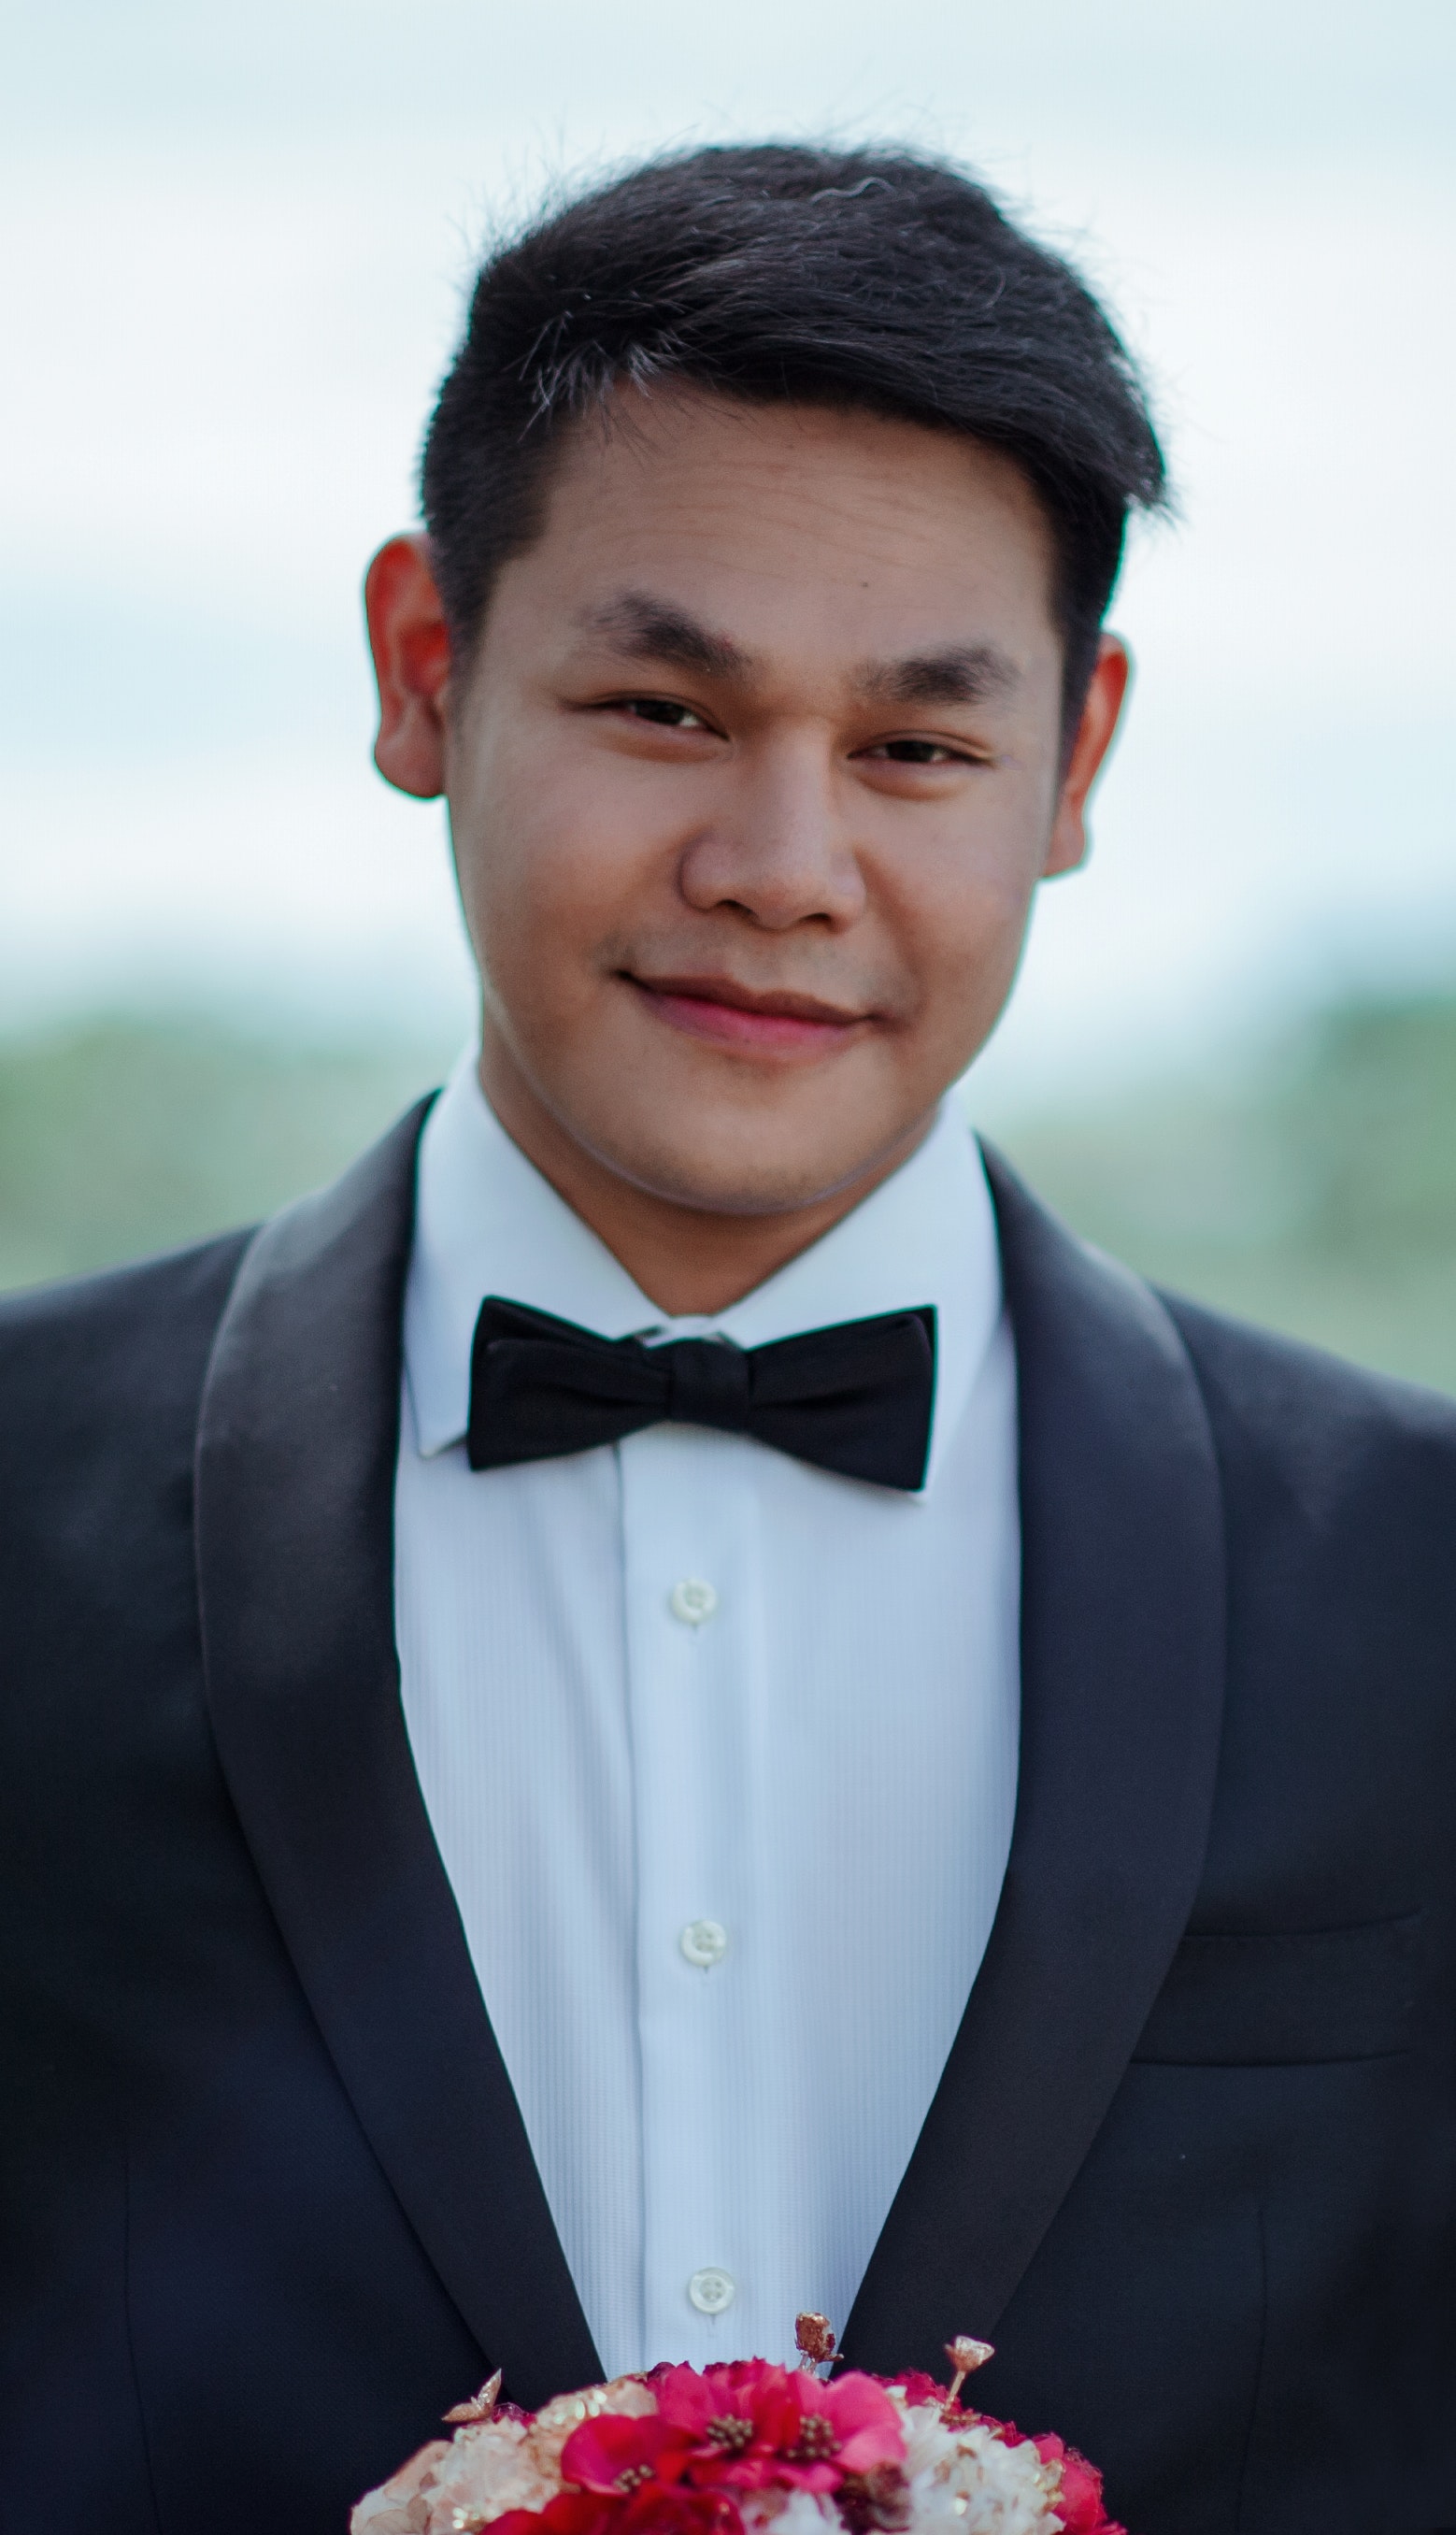 Free photo: Photography of a Guy Wearing Formal Attire - Bow tie, Man ...